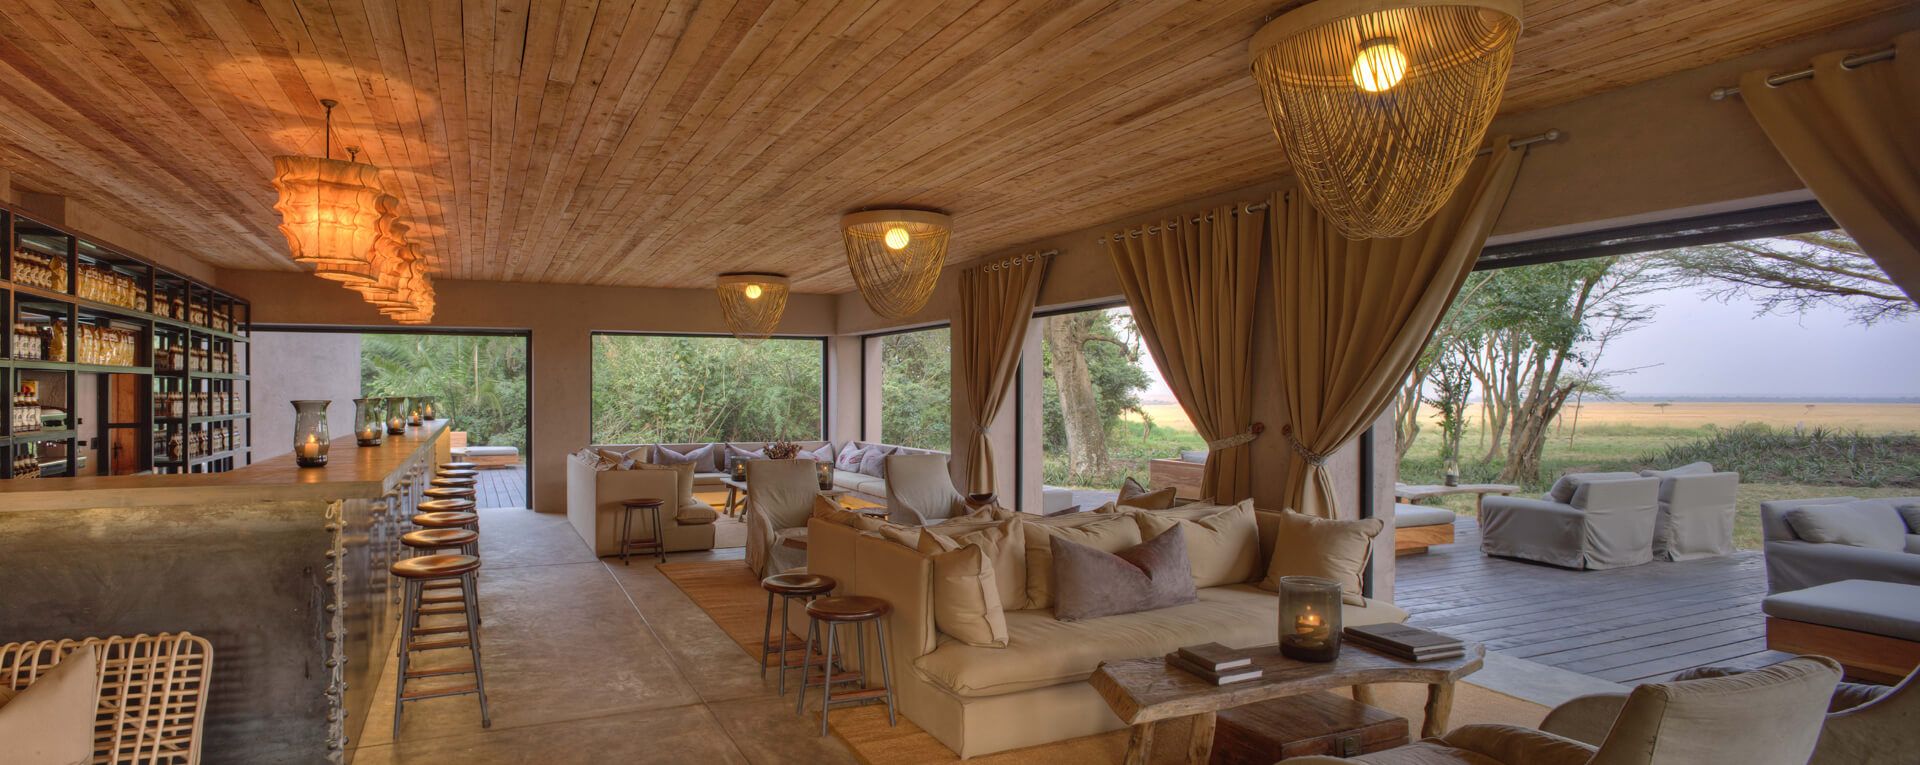 & Beyond Kichwa Tembo Tented Camp In Kenya, Book Today – Azure Collection